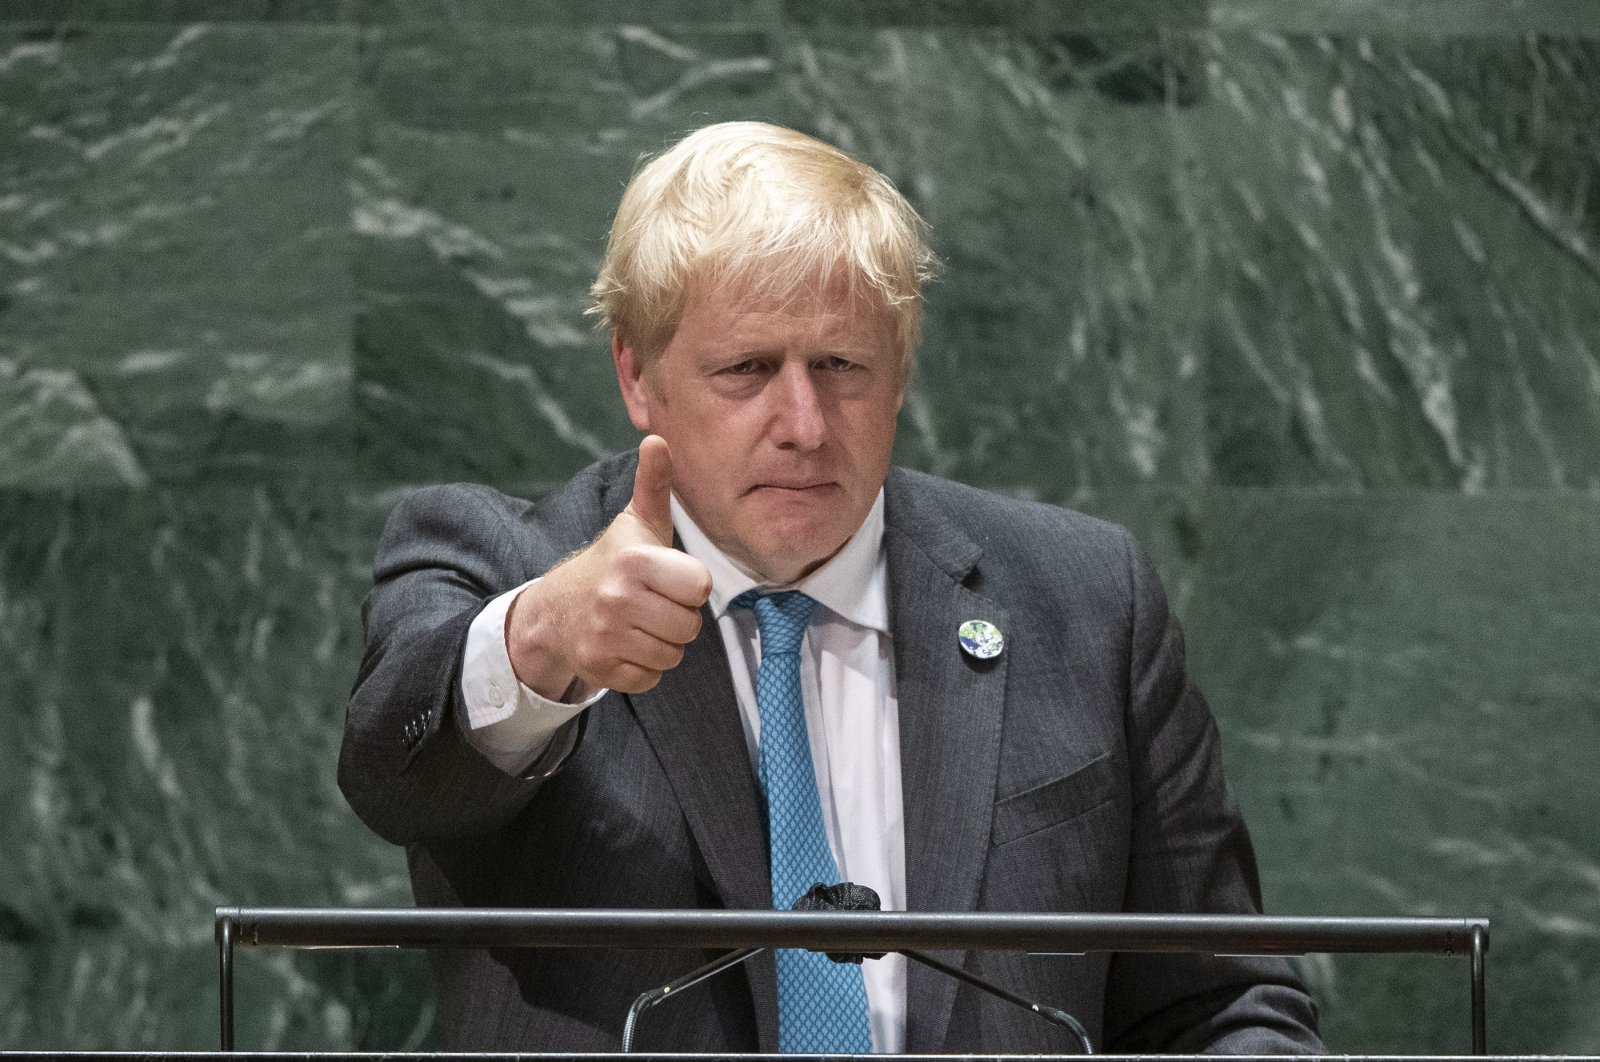 British Prime Minister Boris Johnson gives a thumbs up after addressing the 76th session of the United Nations General Assembly, Sept. 22, 2021, at U.N. headquarters, U.S. (AP Photo)